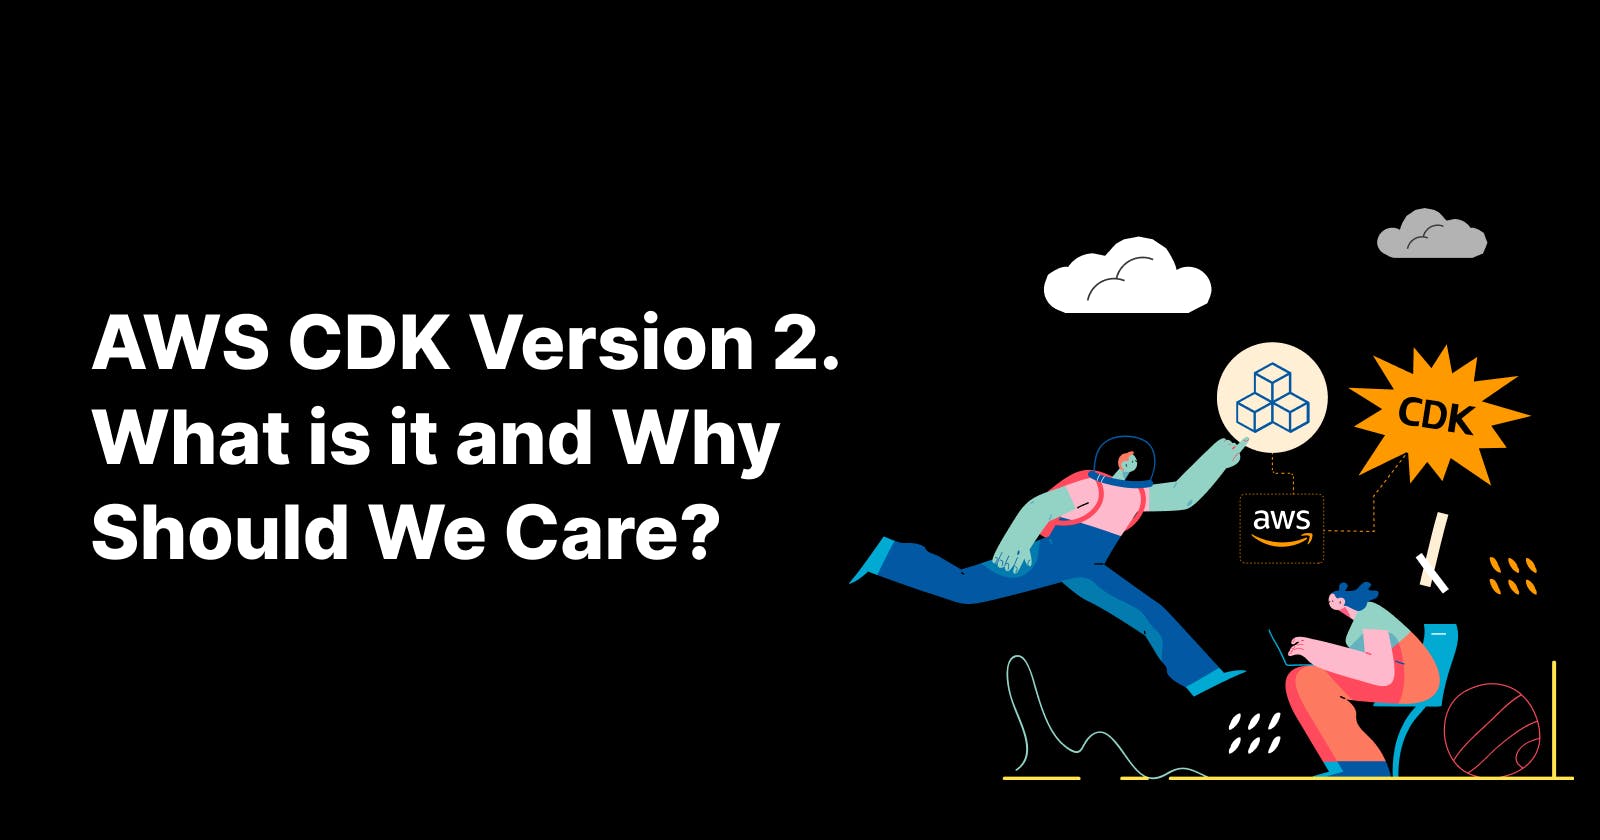 AWS CDK Version 2. What Is It and Why Should We Care?